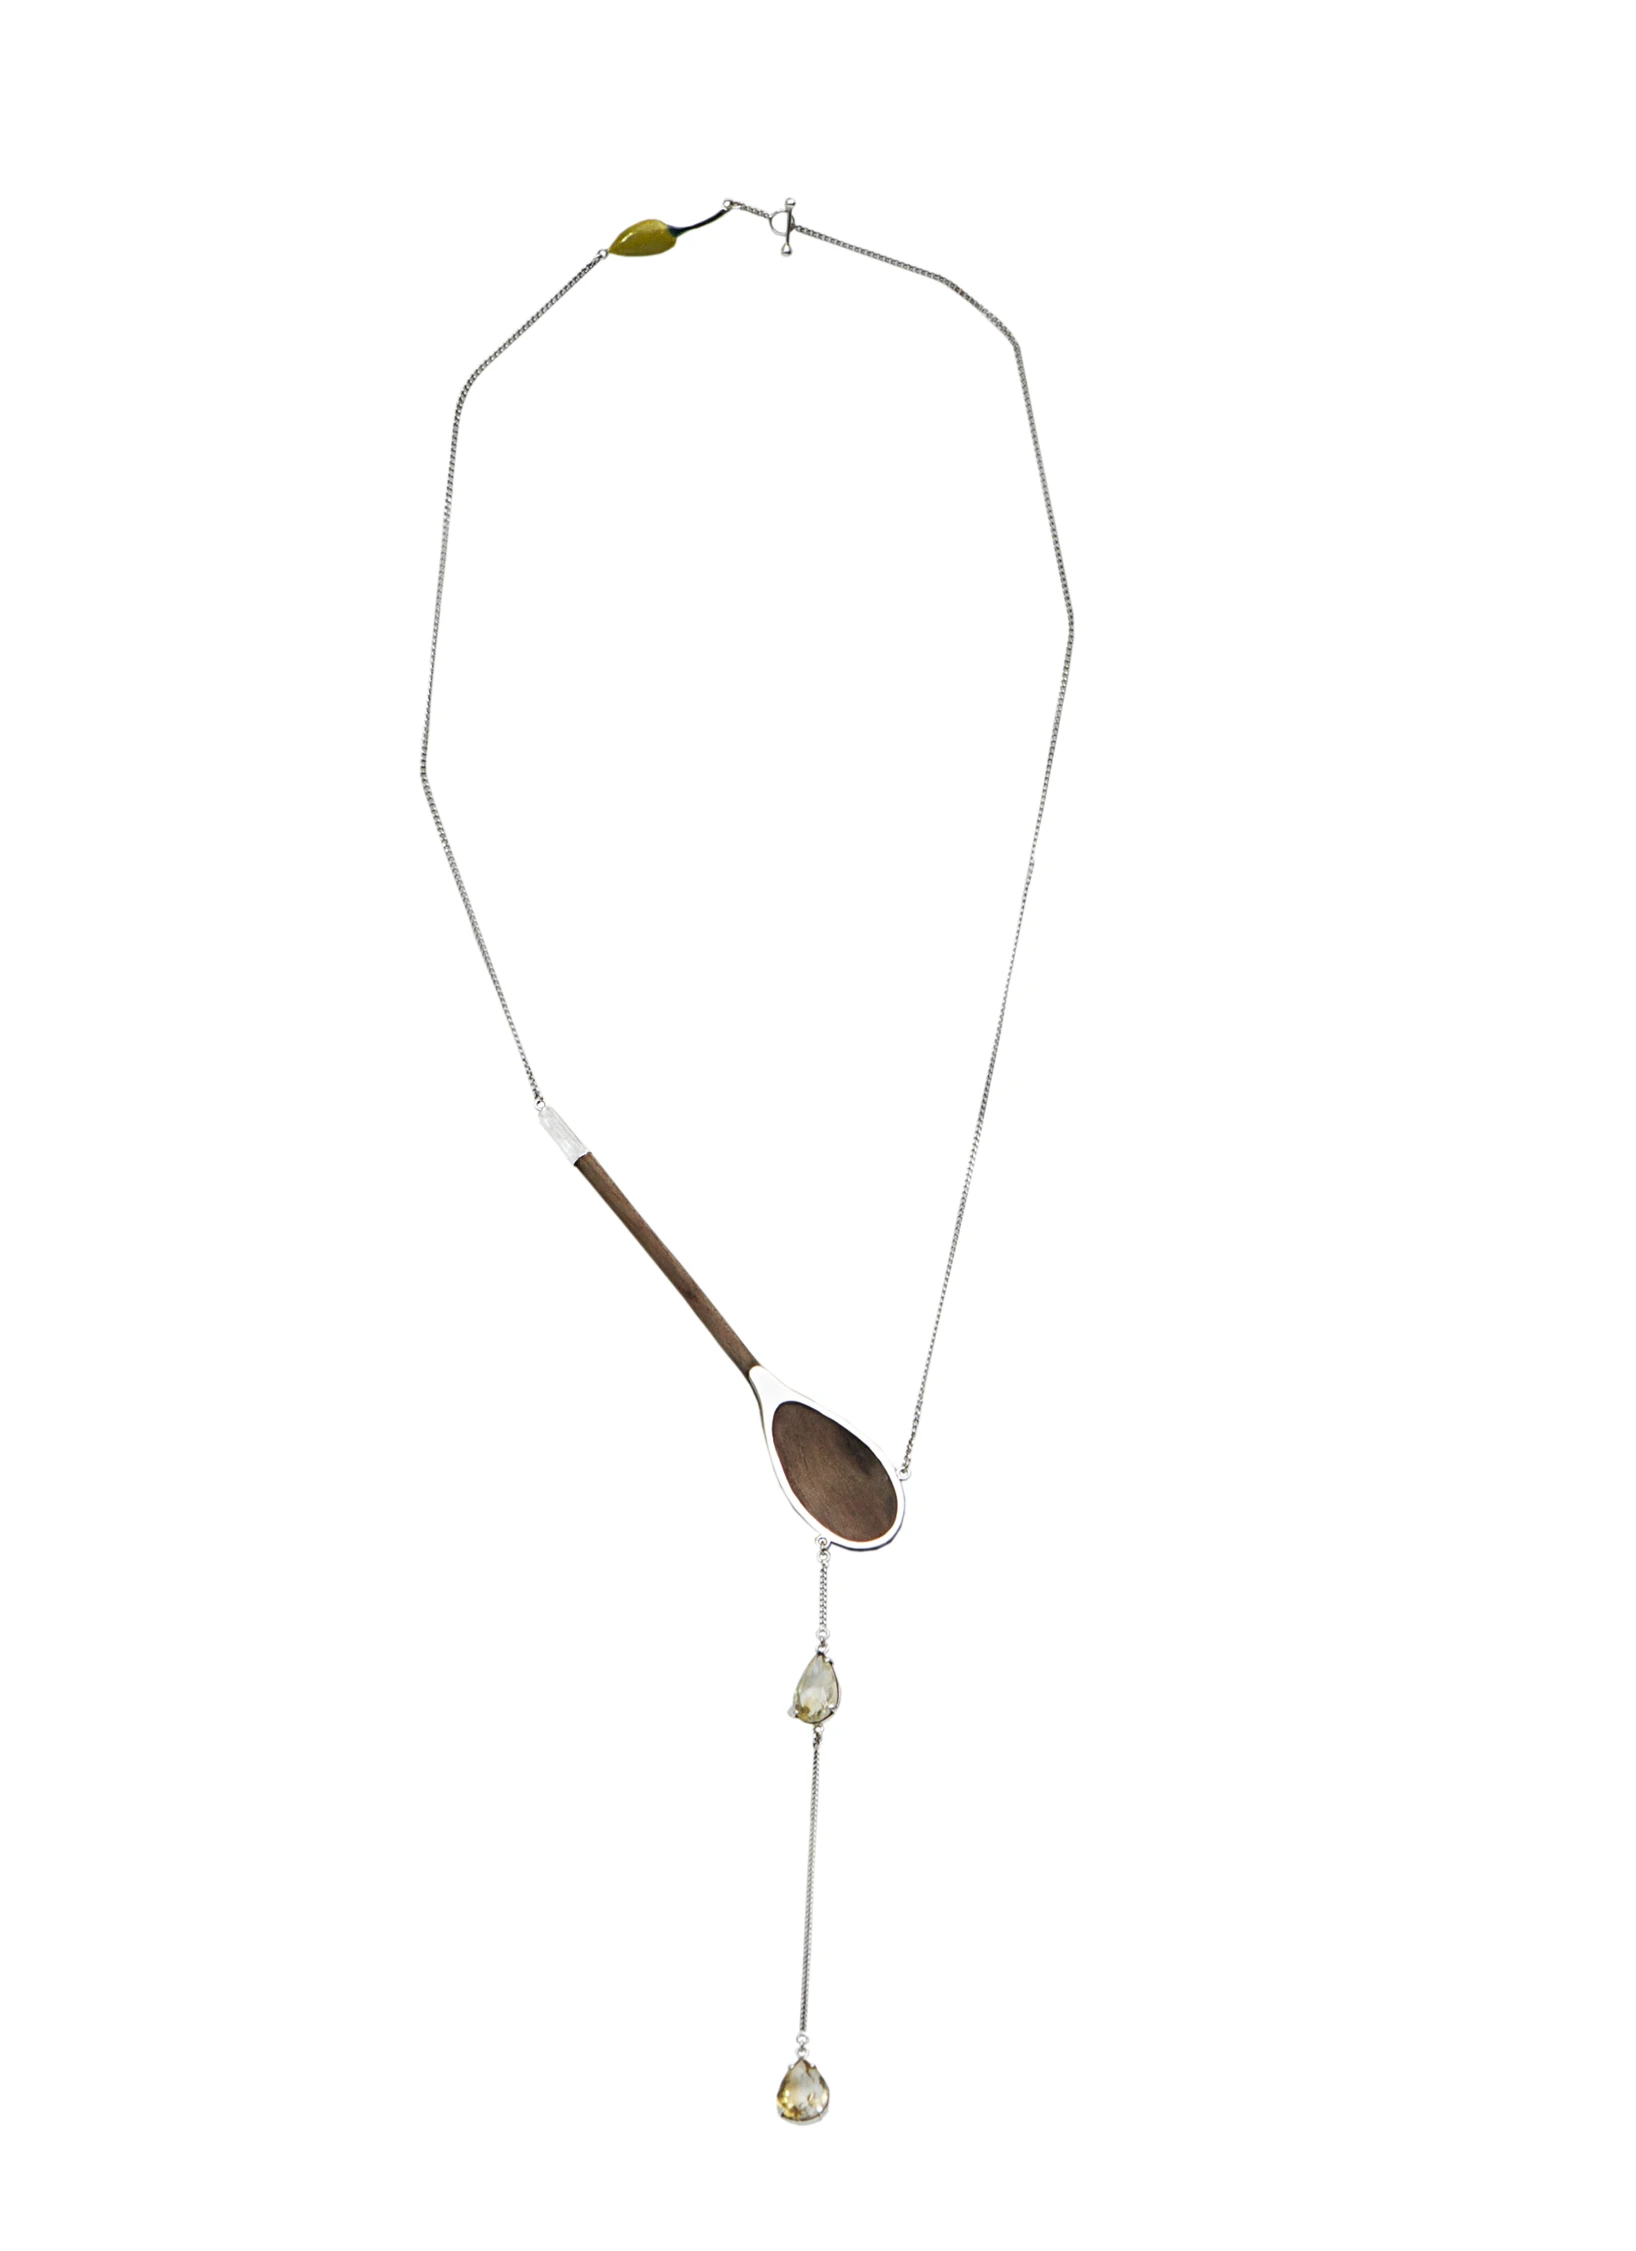 a necklace with a paddle, a bead and a rope